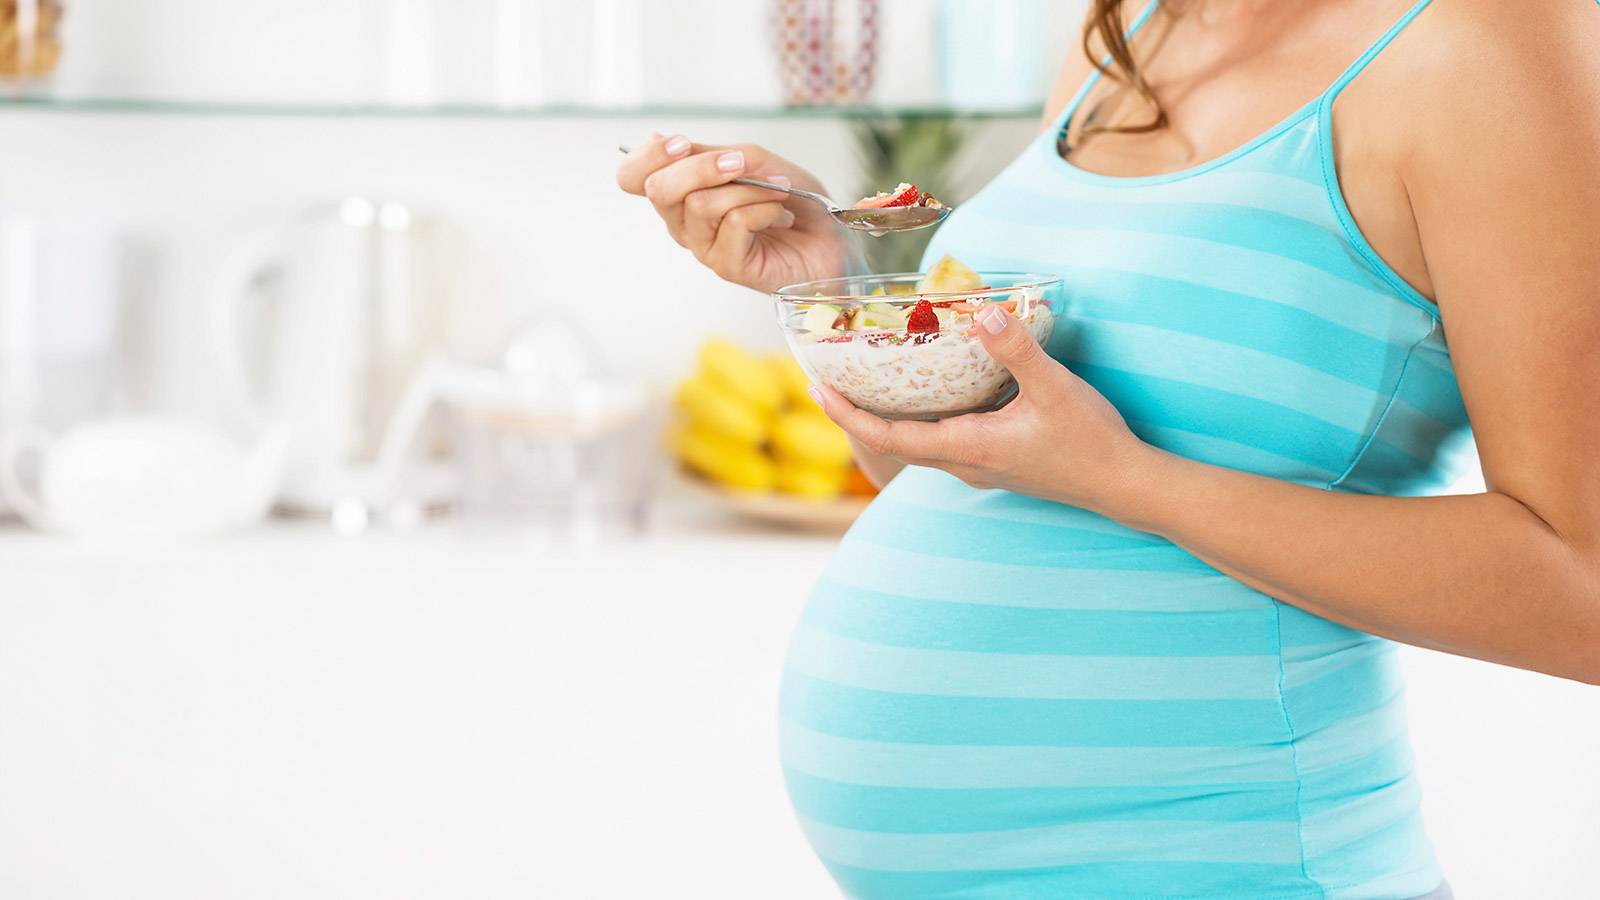 Make sure your pregnancy diet includes this!